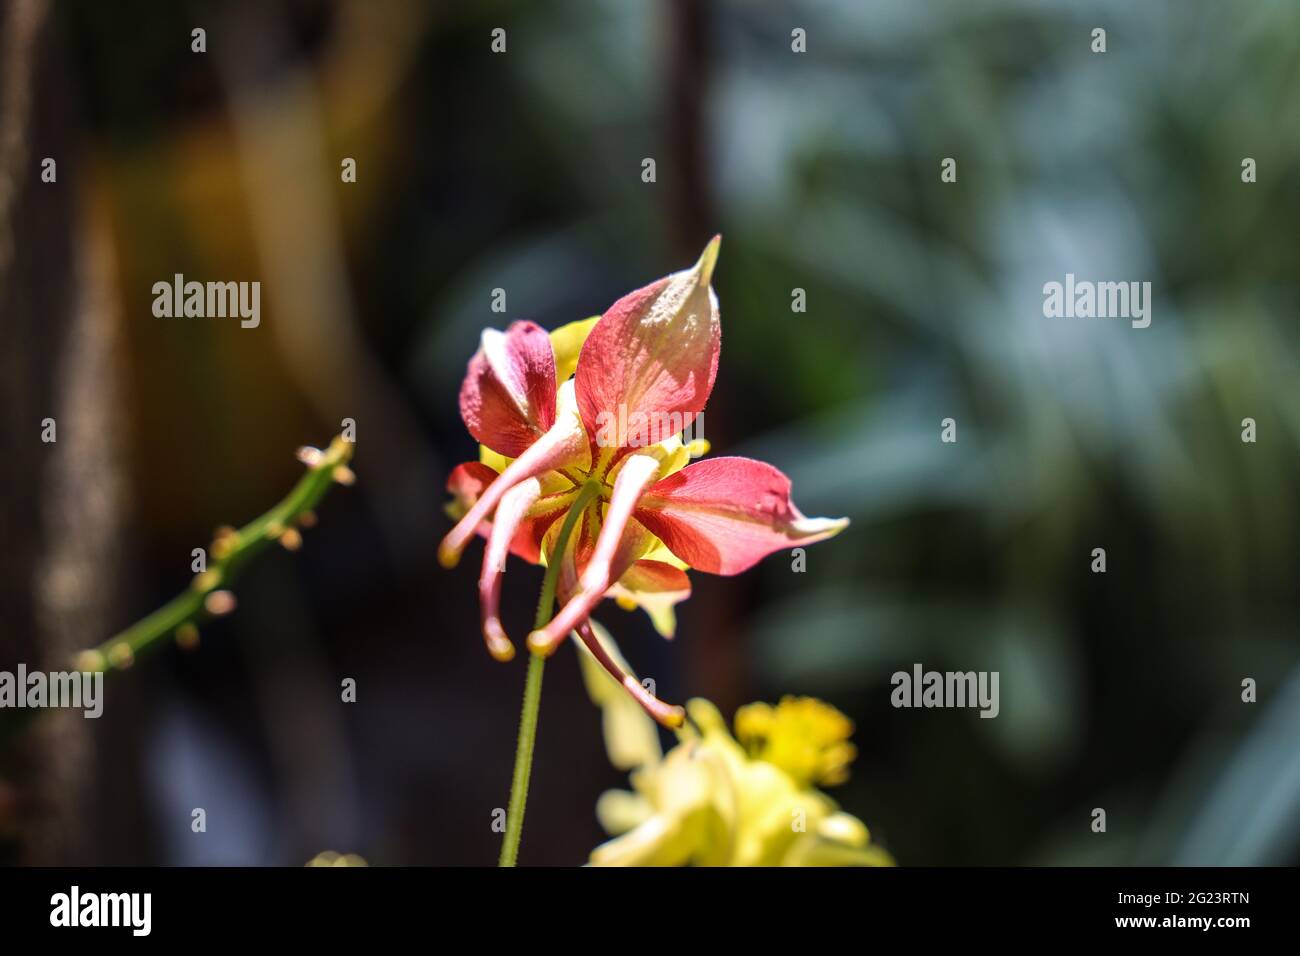 A columbine also known as the Yellow Queen and Granny’s Bonnet, seen from behind the plant. Stock Photo